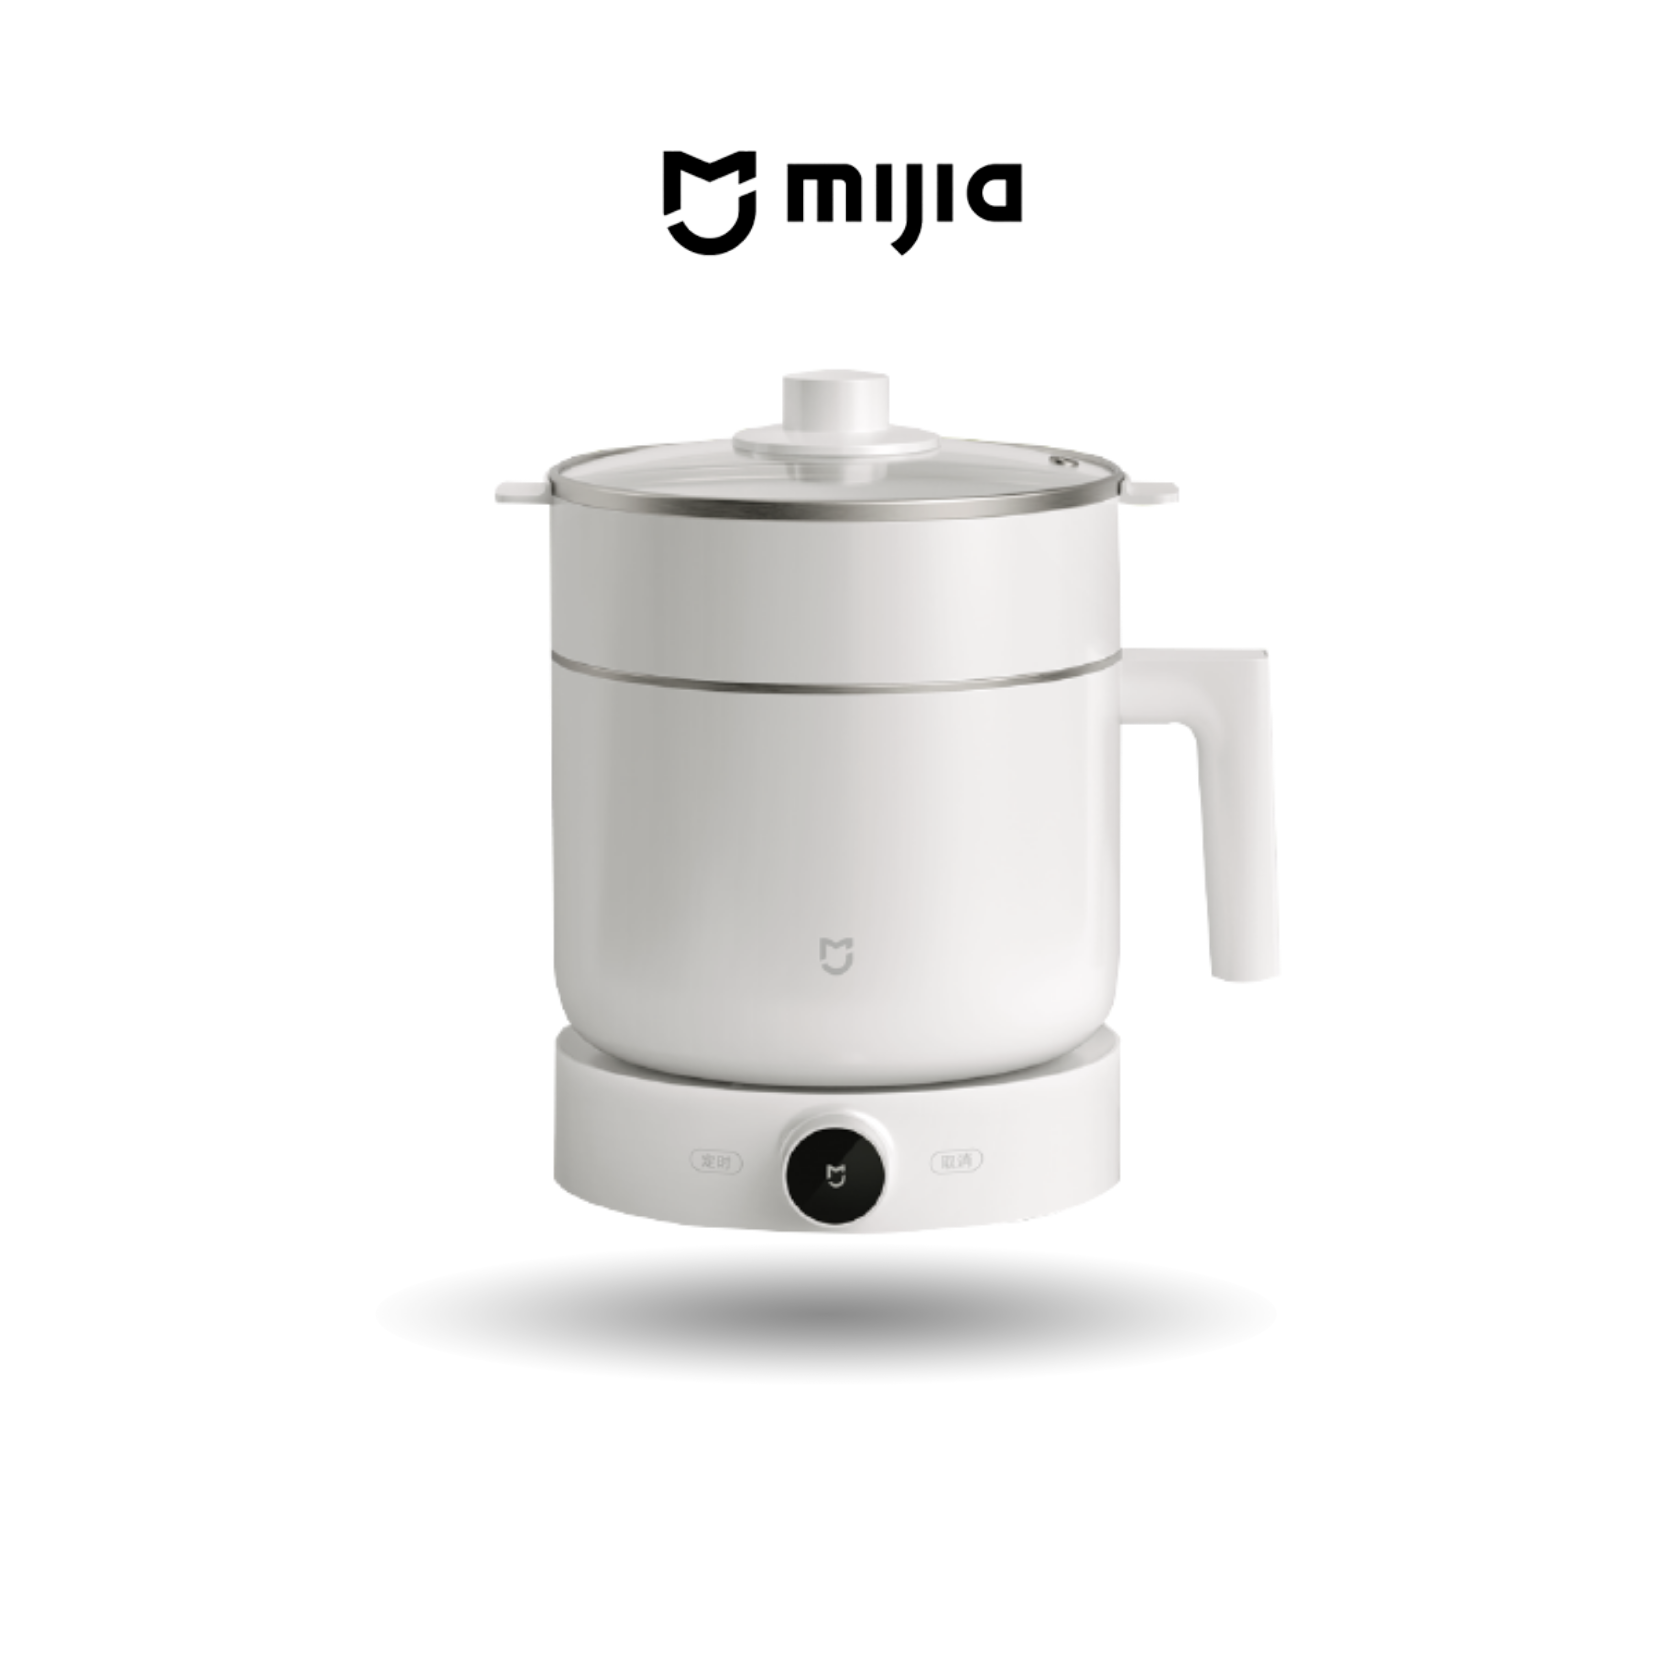 Mijia Smart Multi-Functional Cooking Pot | 1.5L Large Capacity | APP Control 9-Gear Firepower | OLED Display Knob